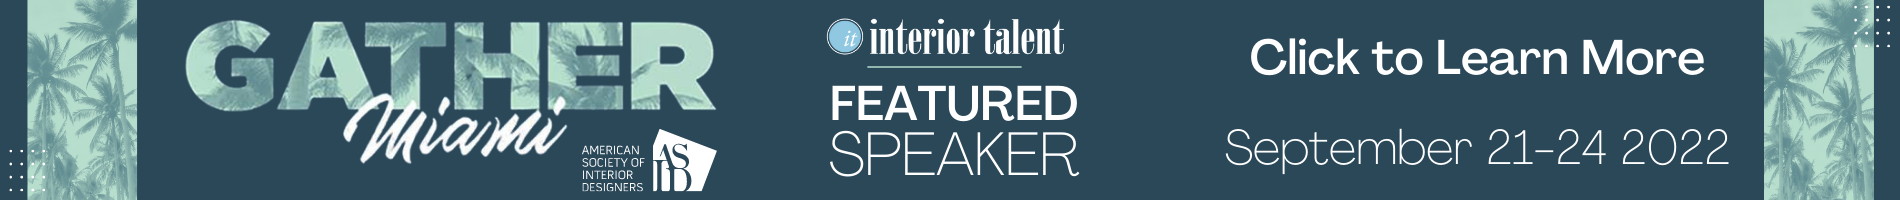 Interior Talent is Featured Speaker at Gather